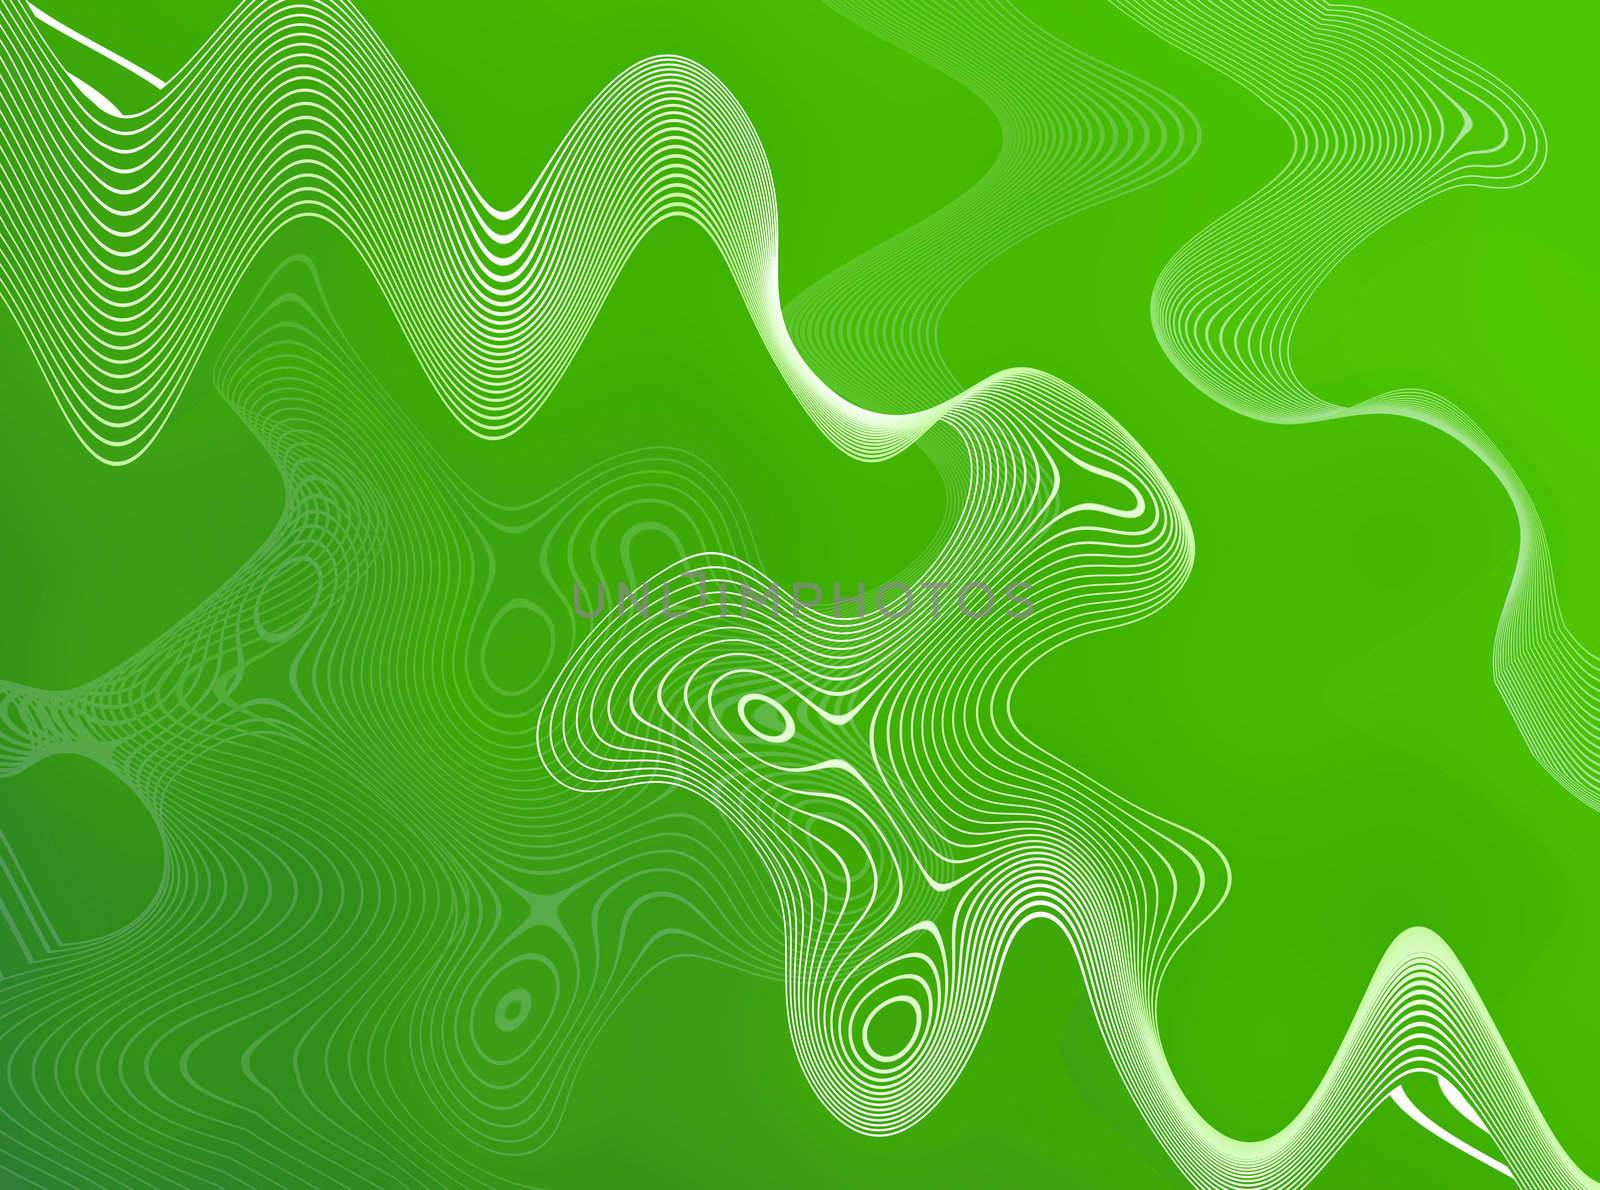 Green Abstract Wires by graficallyminded